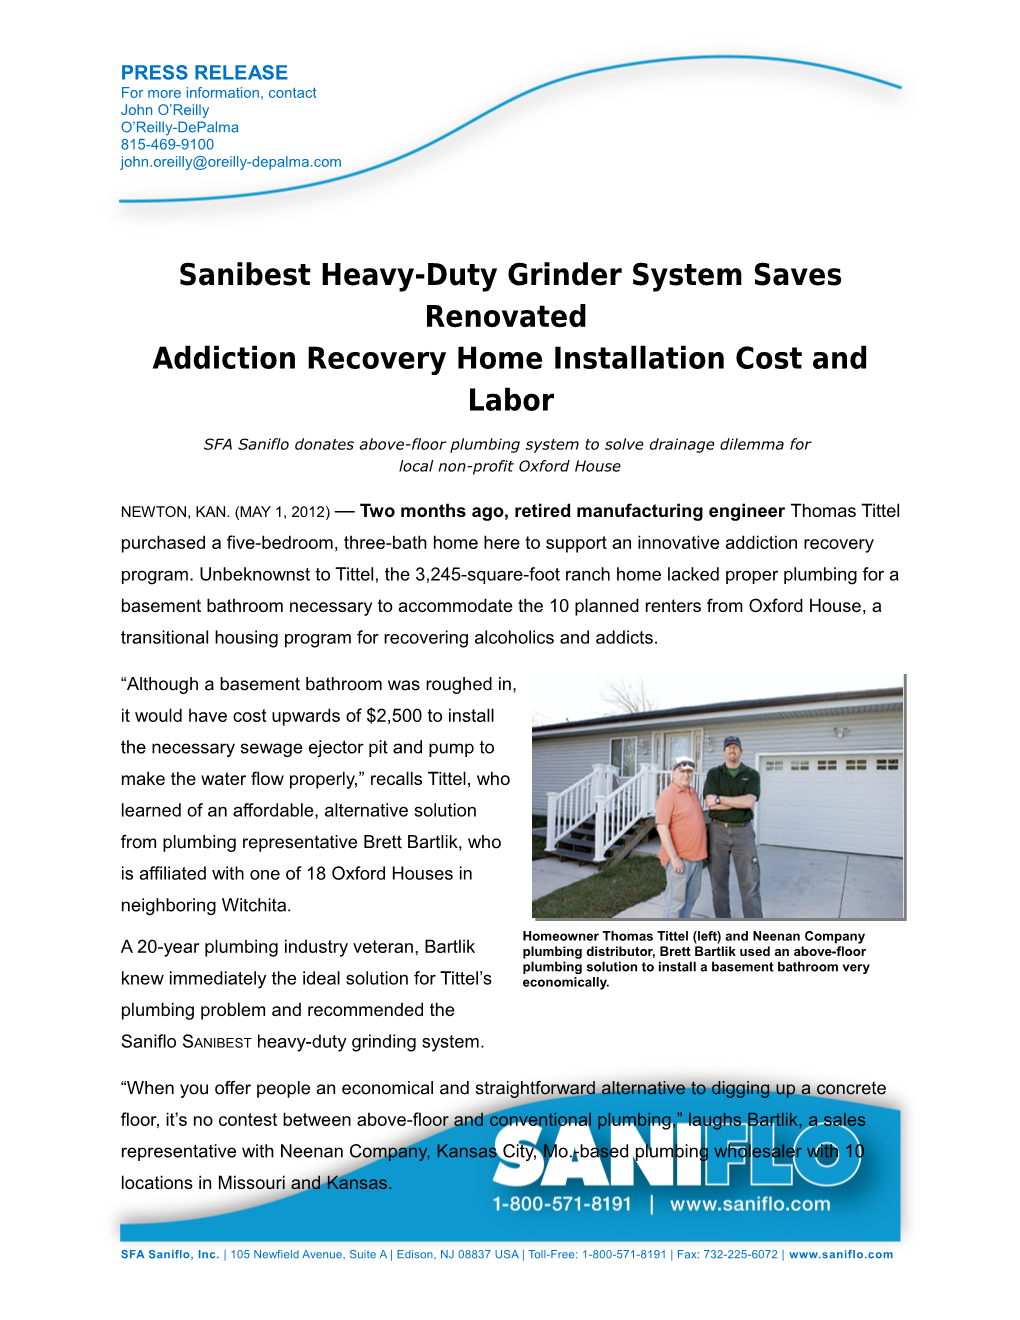 Sanibest Heavy-Duty Grinder System Saves Renovated